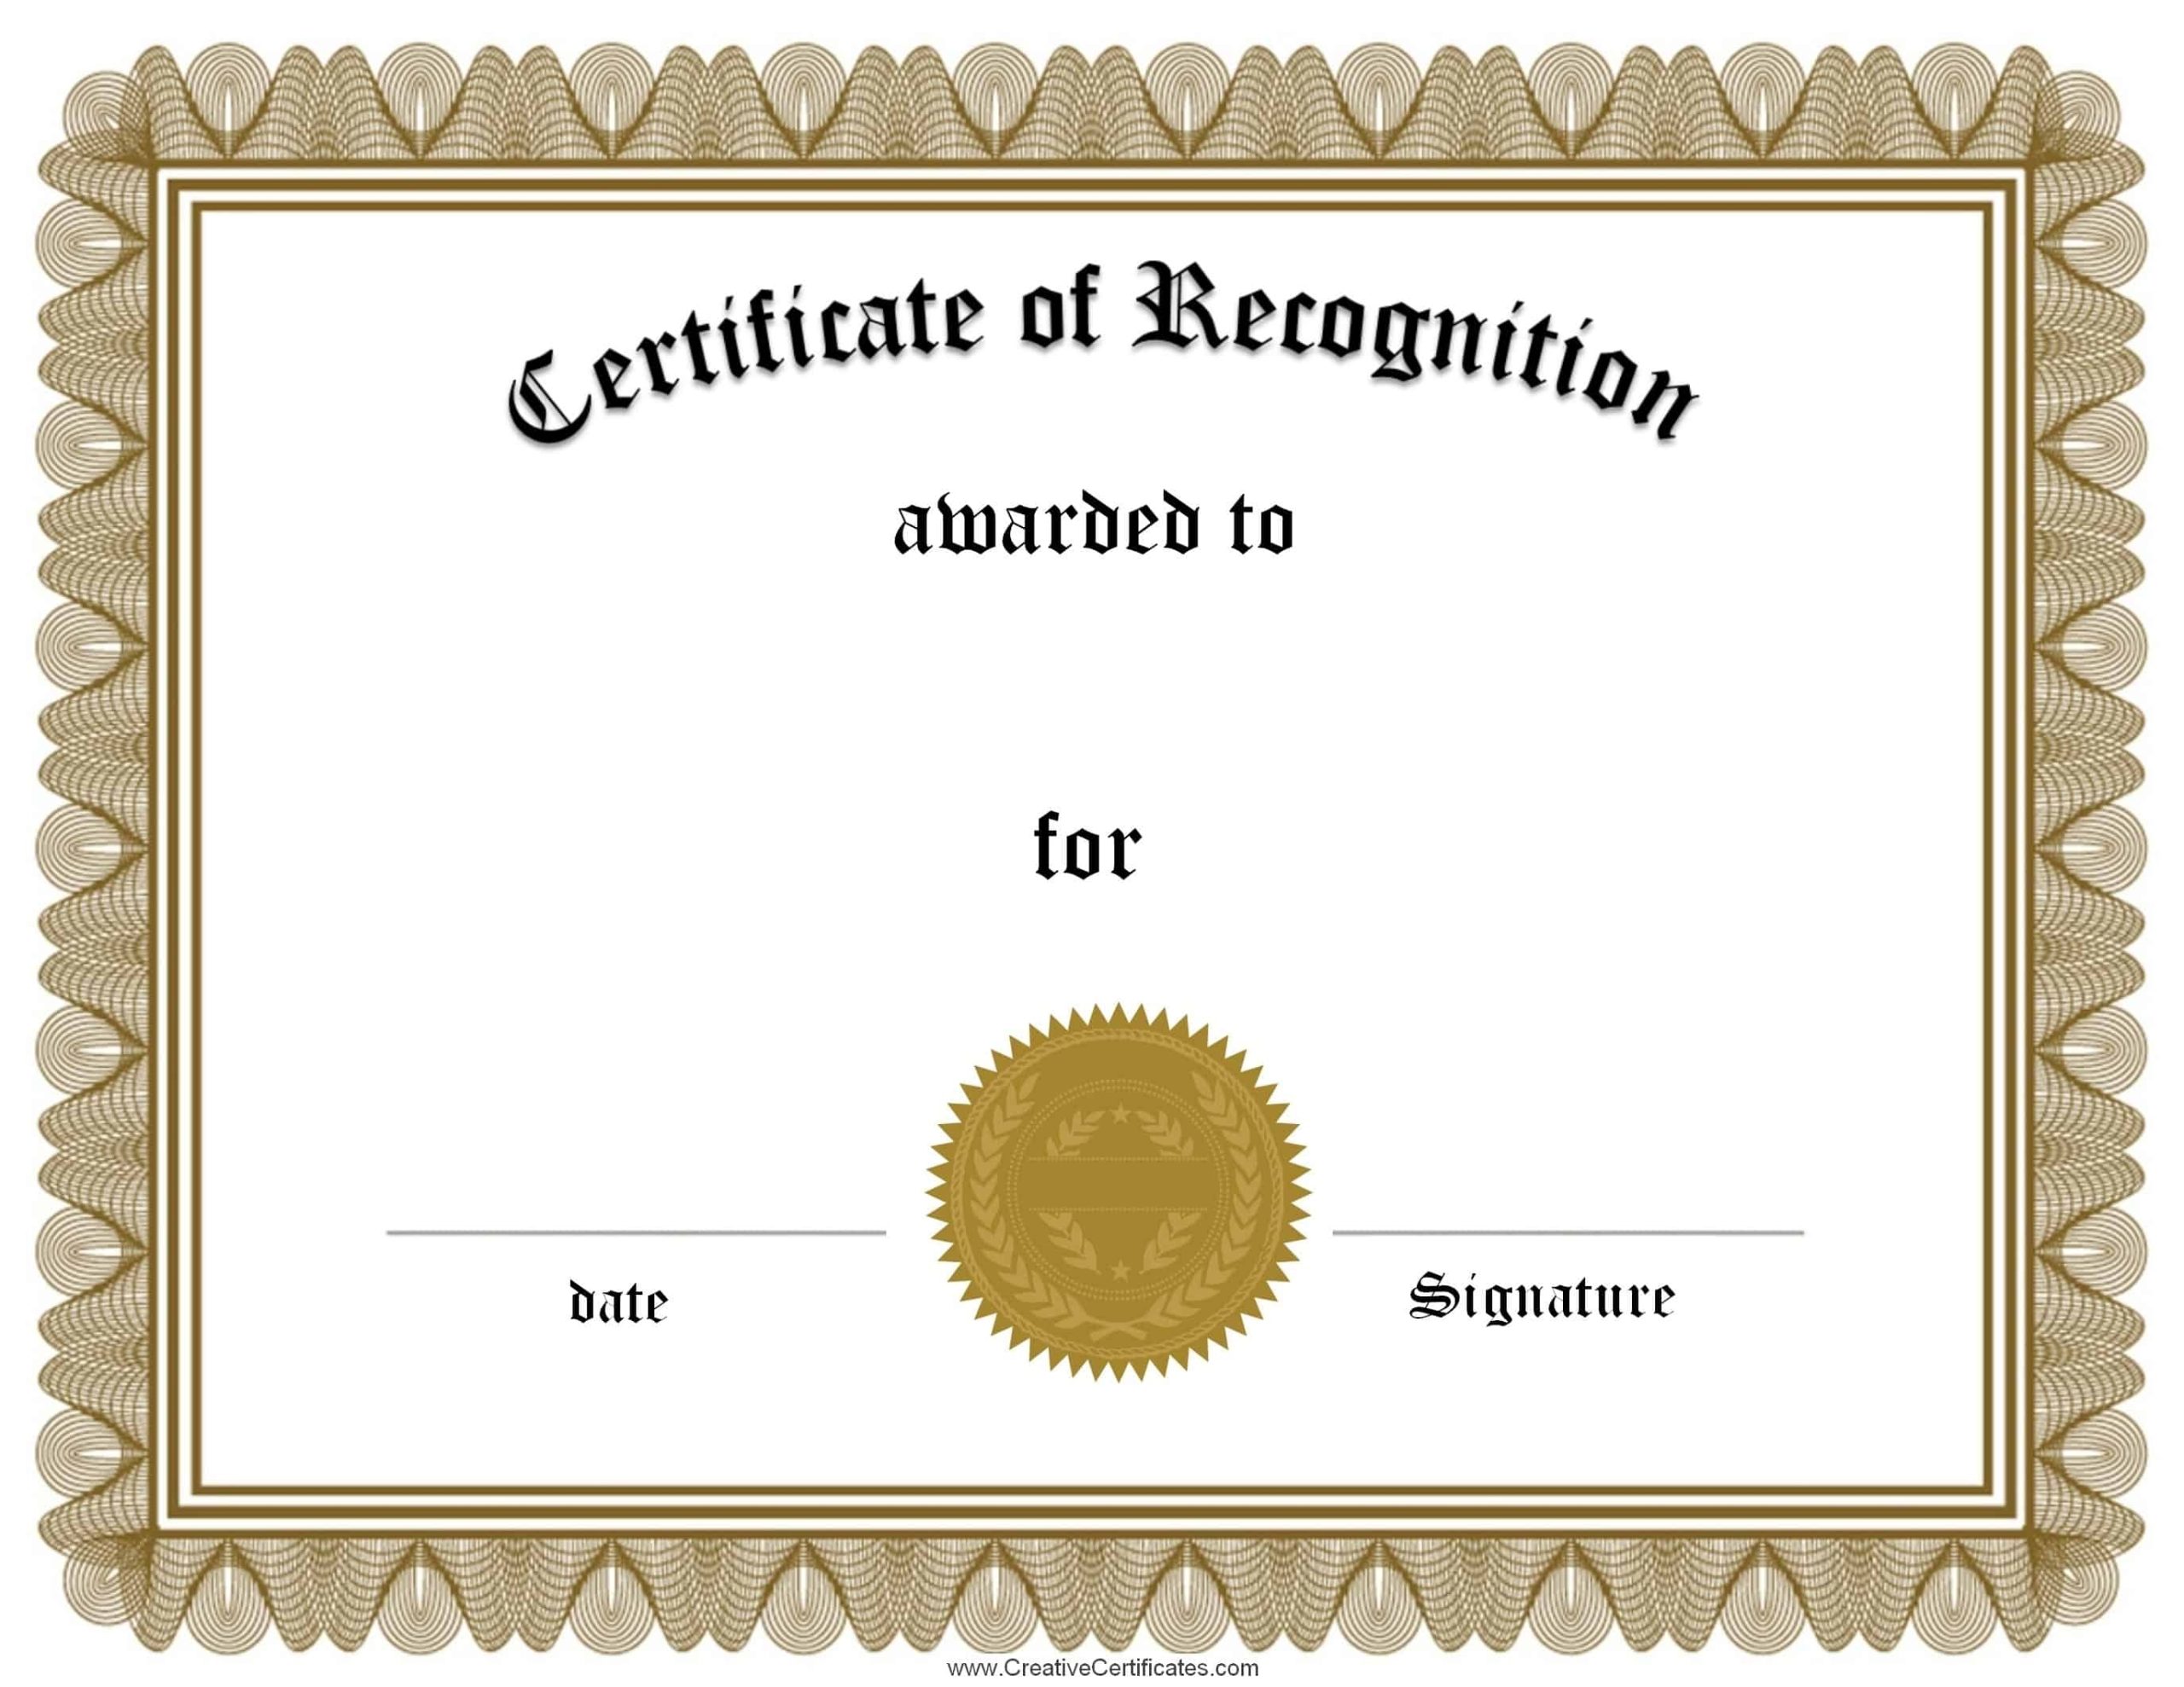 Free Certificate Of Recognition Template | Customize Online Throughout Sample Certificate Of Recognition Template